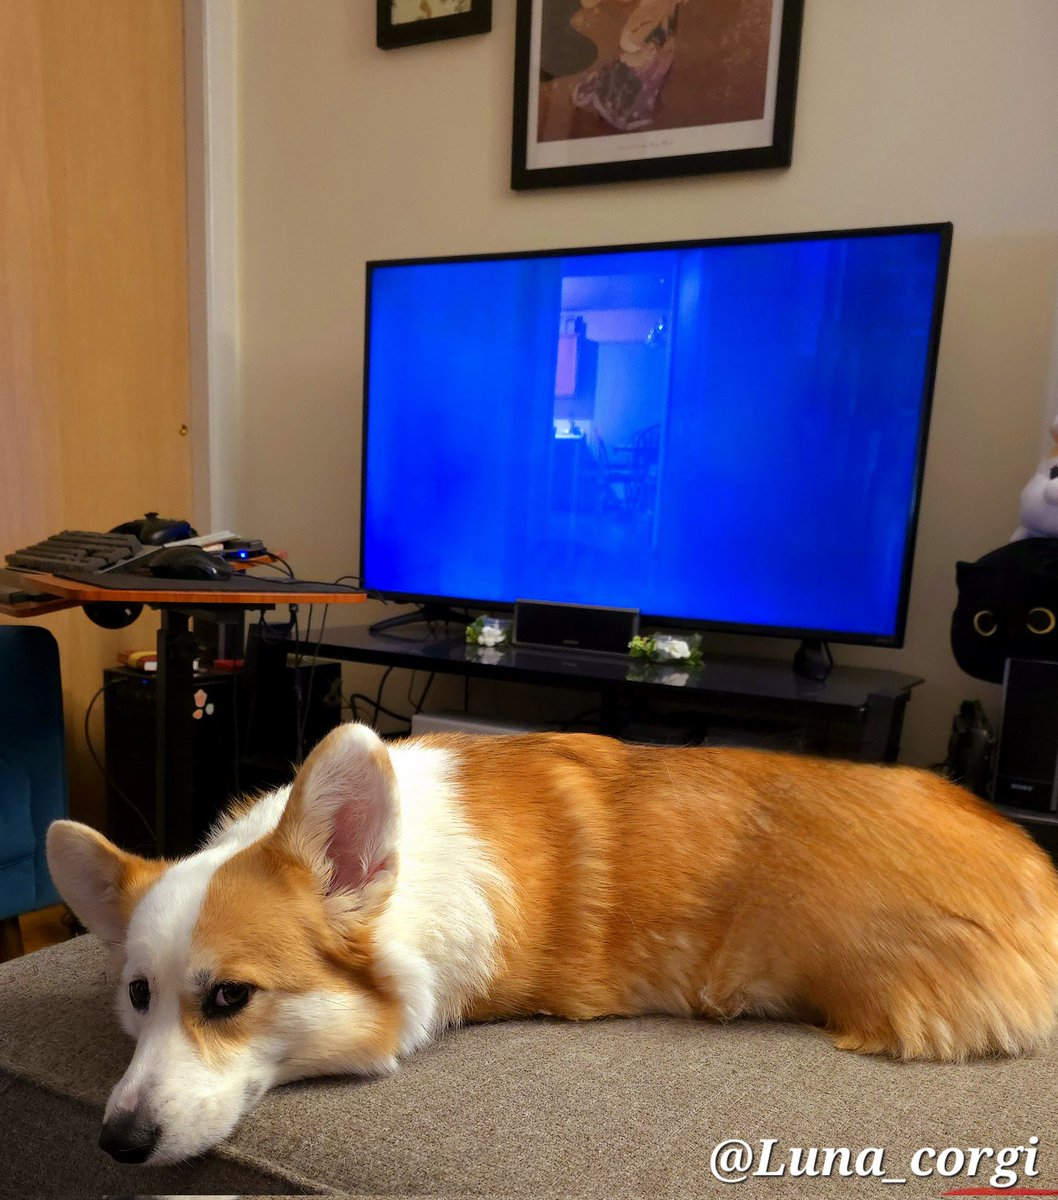 In honor of #NationalParanormalDay, today's #horrormovie is 'Rorschach'. It's a #FoundFootage film about a team of skeptics investigating a haunted home.😧🖥👻

#dog #corgi #CorgiCrew #HorrorMovies #paranormal